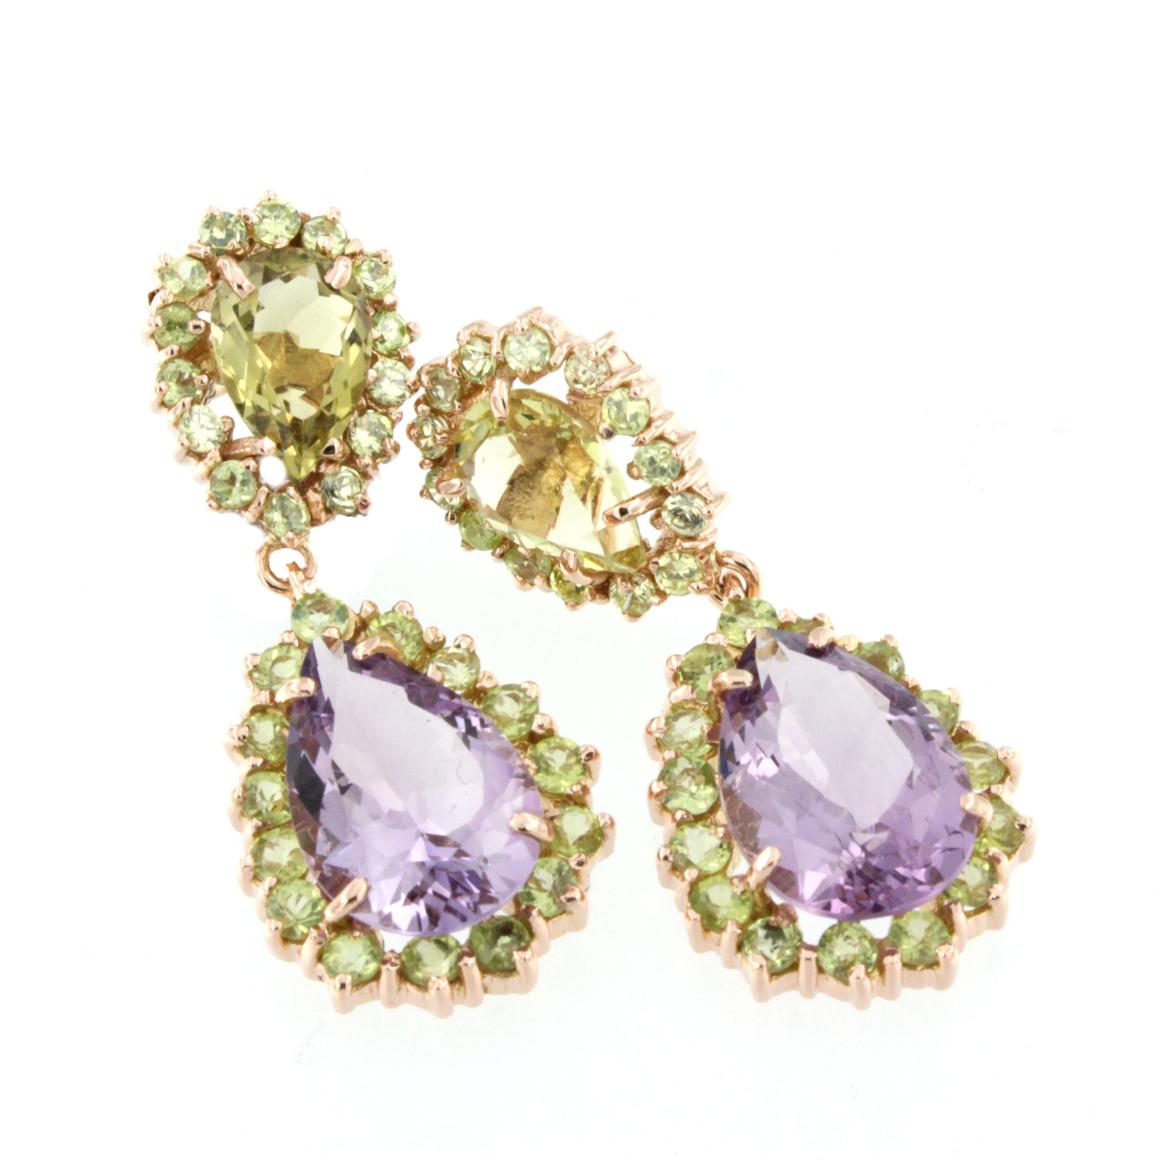 Diana Earrings , ispired by a Queen . Amazing earrings perfect for any occasion.
Earrings in 18k rose gold with Peridot (round cut, size: 2 and 3 mm), Amethyst (drop cut, size: 10x15 mm) and Lemon Quartz (drop cut, size: 7x10 mm)  